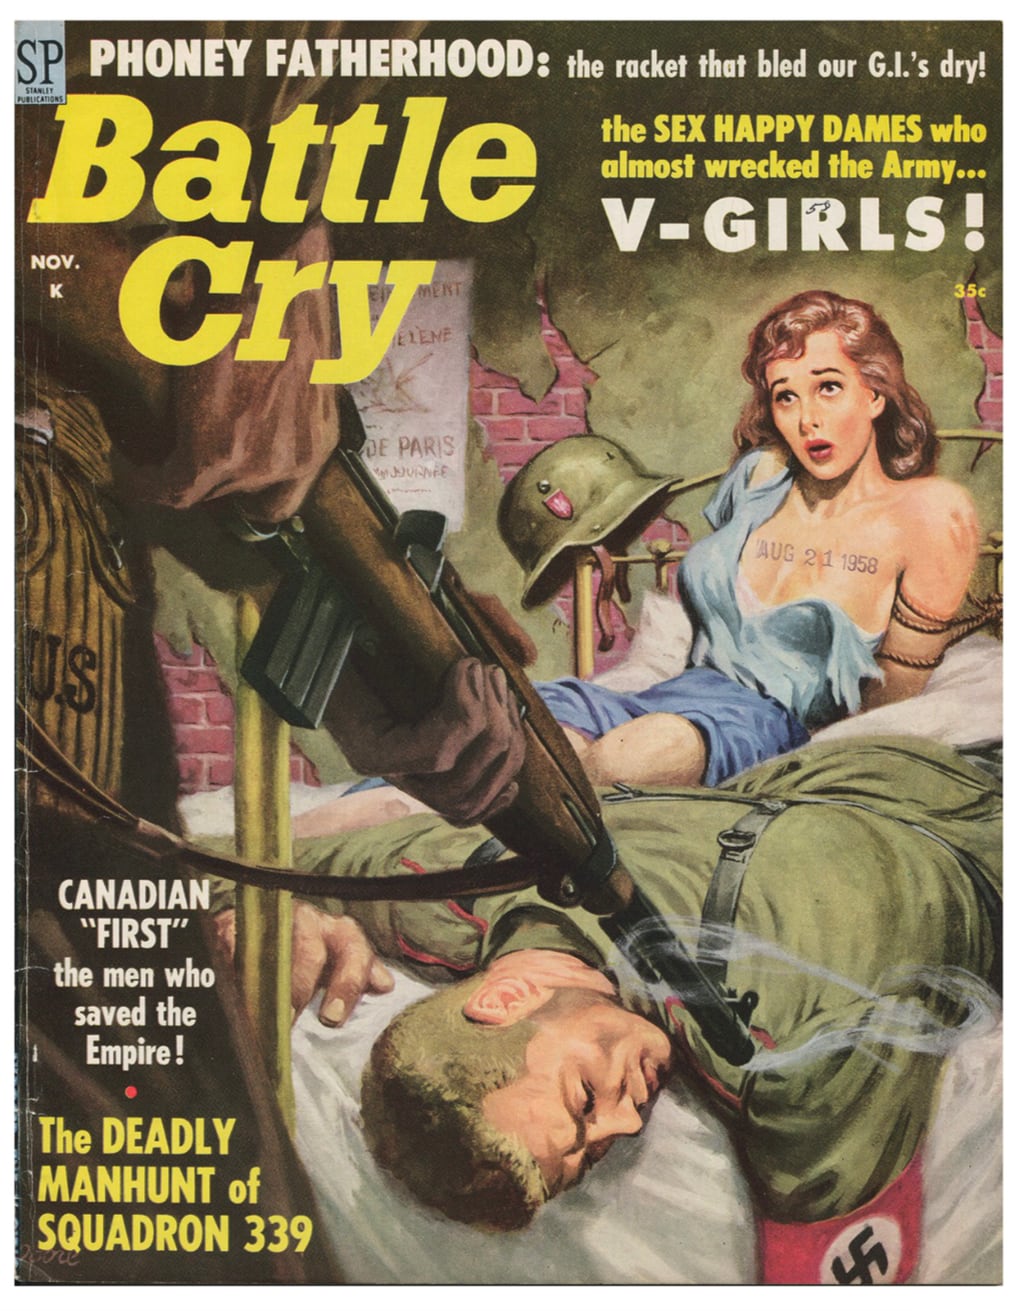 War, heroism and sex: Pulp magazines & the messages they perpetuated